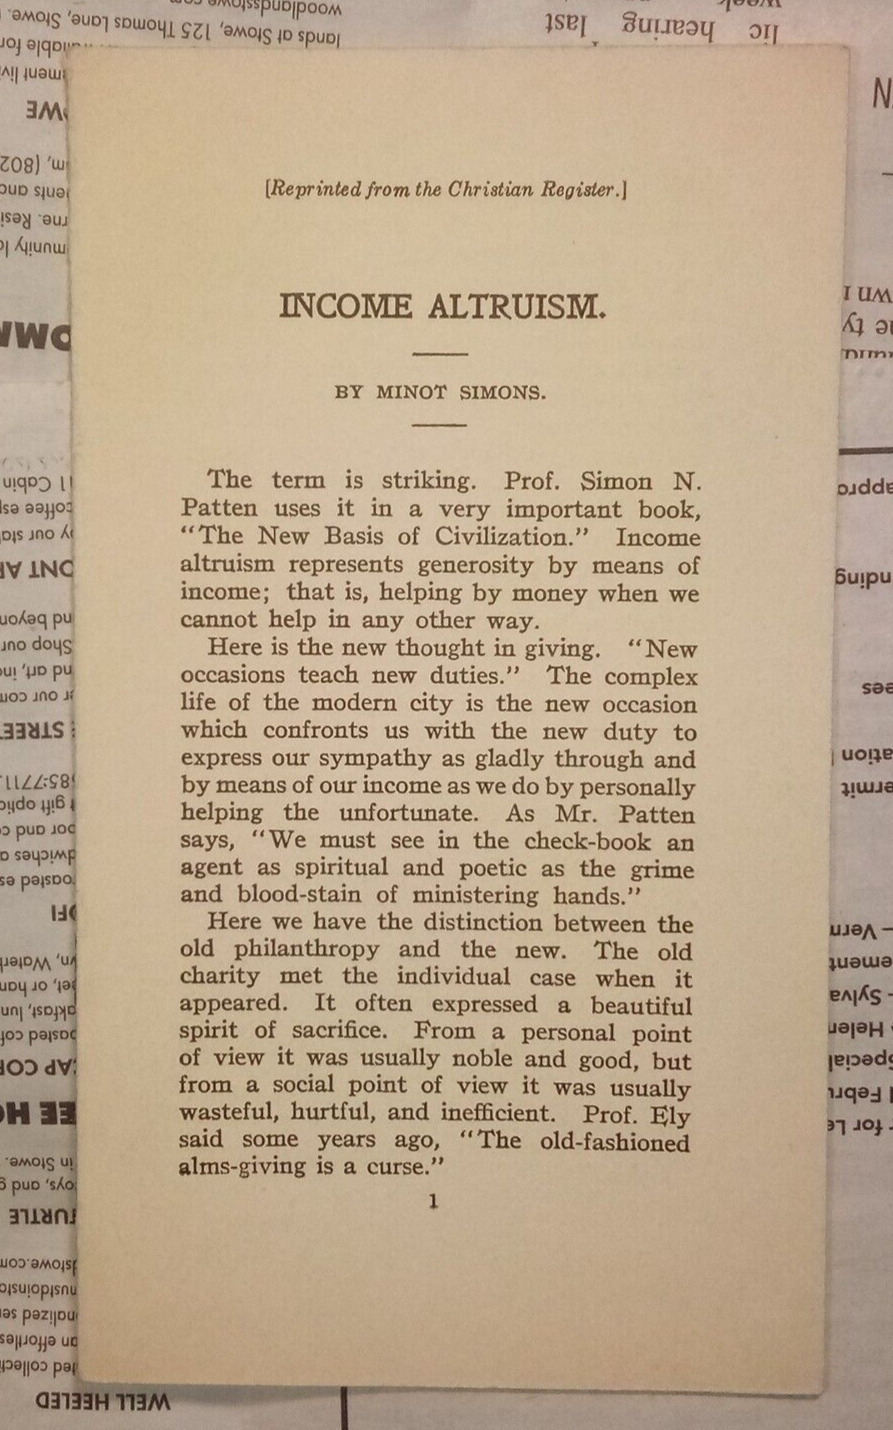 UNITARIAN - Income Altruism Minot Simons - Reprinted from the Christian Register